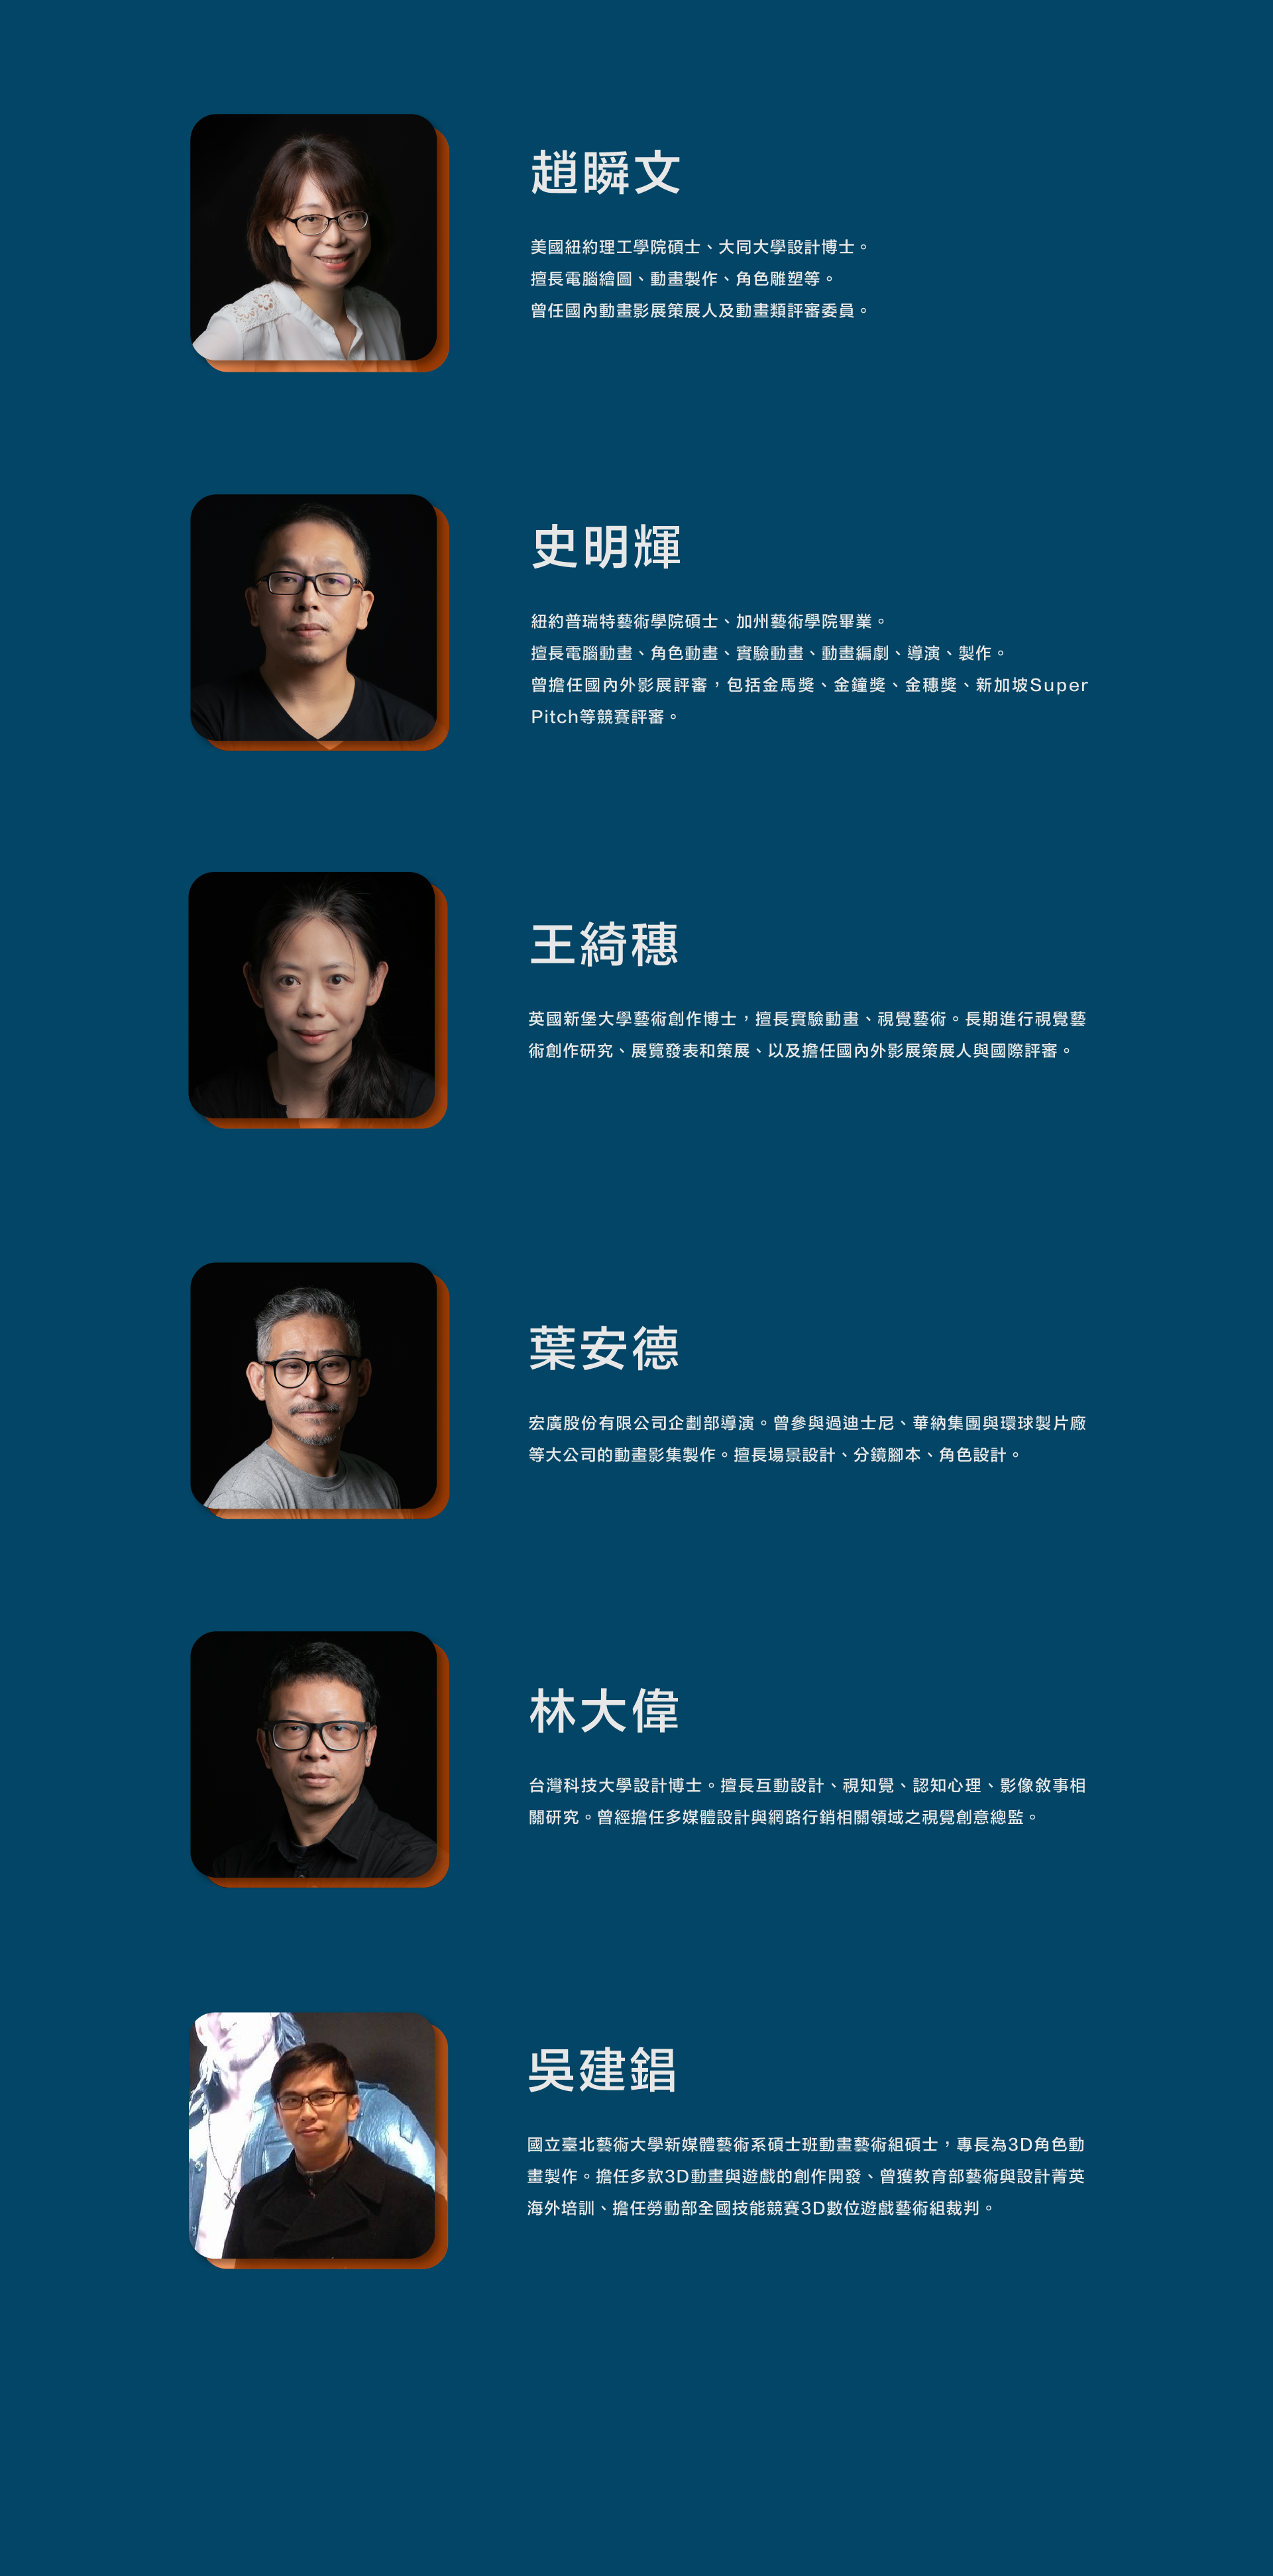 趙瞬文Joanne Chao/林大偉David Lin/史明輝Jack Shih/吳建錩Chien Chang Wu/王綺穗Wang Chi-Sui/葉安德Ander Yeh Joanne Chao holds a master's degree from the New York Institute of Technology in the United States and a Ph.D. in Design from Da-Tong University. She specializes in computer graphics, animation production, and character sculpting. Additionally, she has served as a curator for domestic animation film festivals, and a juror for several competitions. David Lin holds a Ph.D. in Industrial and Commercial Design in Design from the Taiwan University of Science and Technology. He specializes in interactive design, visual perception, cognition psychology, and visual storytelling-related research. He previously served as the Creative Director for visual innovation in the fields of multimedia design and online marketing. Jack Shih holds a master's degree from Pratt Institute in New York and graduated from the California Institute of the Arts. He excels in computer animation, character animation, experimental animation, animation writing, directing, and production; he serves as a jury member for various domestic and international film festivals, including the Golden Horse Awards, Golden Bell Awards, Golden Harvest Awards, and Singapore Super Pitch competition. Chien Chang Wu holds a master's in Animation Arts from the New Media Art Department at the National Taipei University of the Arts. His expertise lies in 3D character animation production. He has been involved in the creative development of various 3D animations and games. He has received training abroad as part of the Ministry of Education's elite program for arts and design and served as a judge for the 3D Digital Game Art category in the National Skills Competition organized by the Ministry of Labor. Wang Chi-Sui holds a Ph.D. from the University of Newcastle upon Tyne in the United Kingdom. Specializing in experimental animation and visual arts, she has actively pursued research and creative work in the field of visual arts. She has showcased her works in exhibitions and has also curated various exhibitions. Additionally, she has served as a curator for both domestic and international film festivals, as well as an international juror for several competitions. Ander Yeh was the director of the Planning Department at Hong Guang Co., Ltd. He has participated in the production of animated series for major companies such as Disney, Warner Bros., and Universal Studios. He excels in scene design, storyboard scripting, and character design.